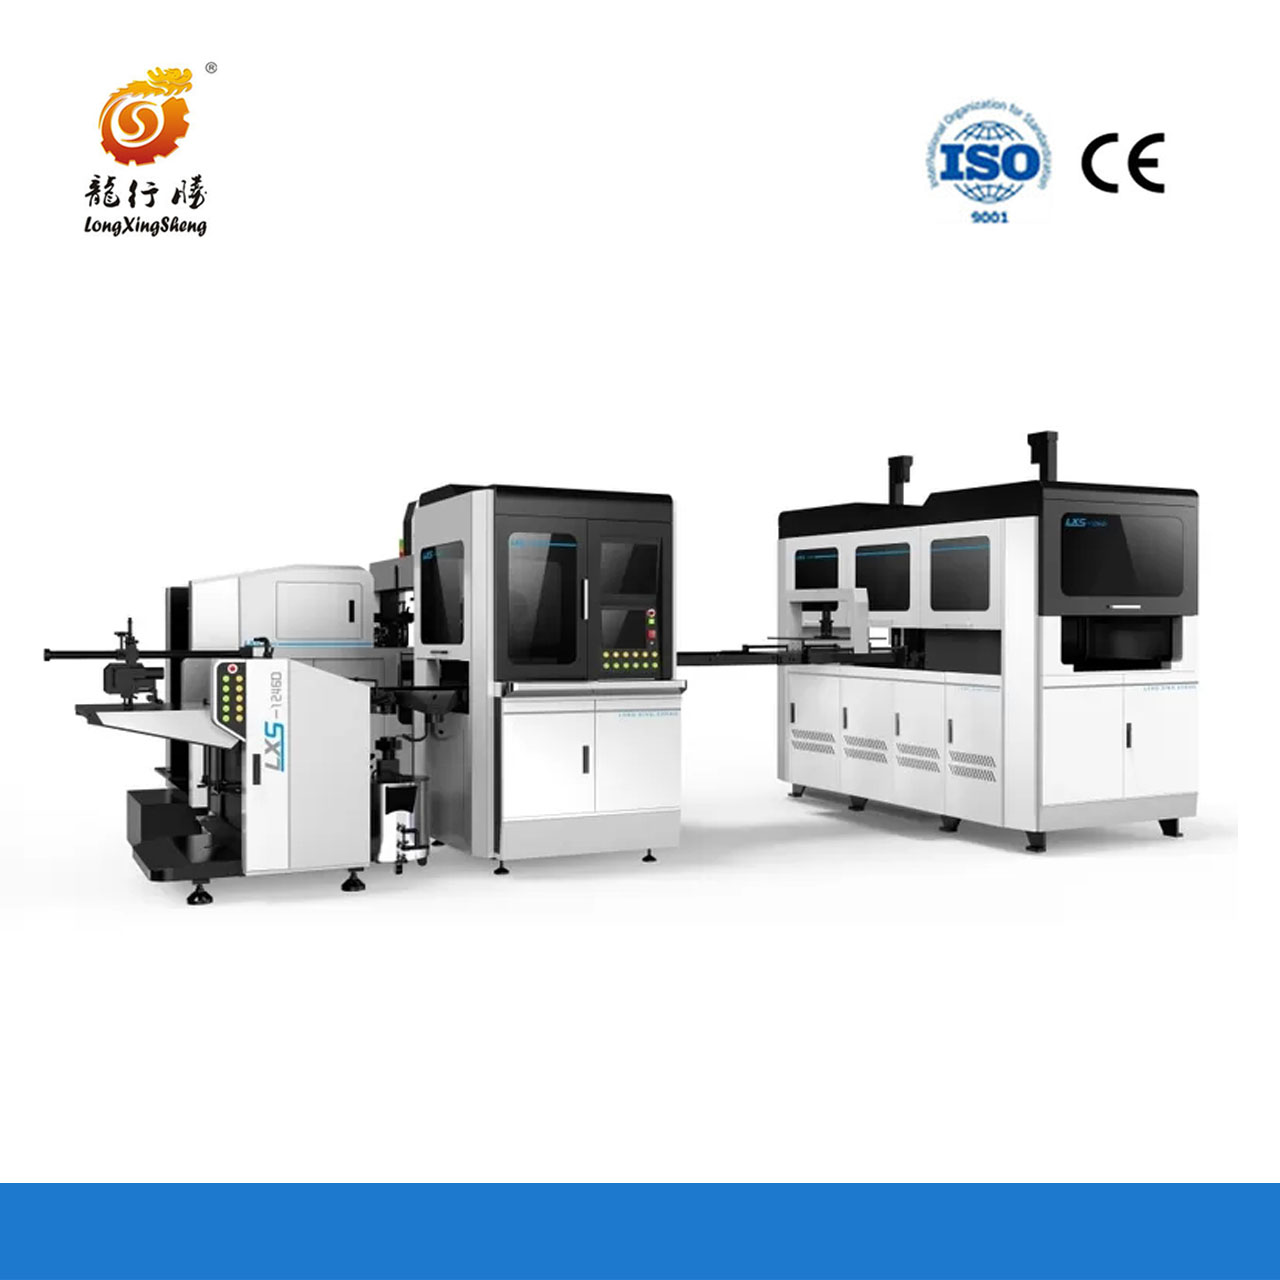 Double Forming System Automatic Rigid Box Making Machine